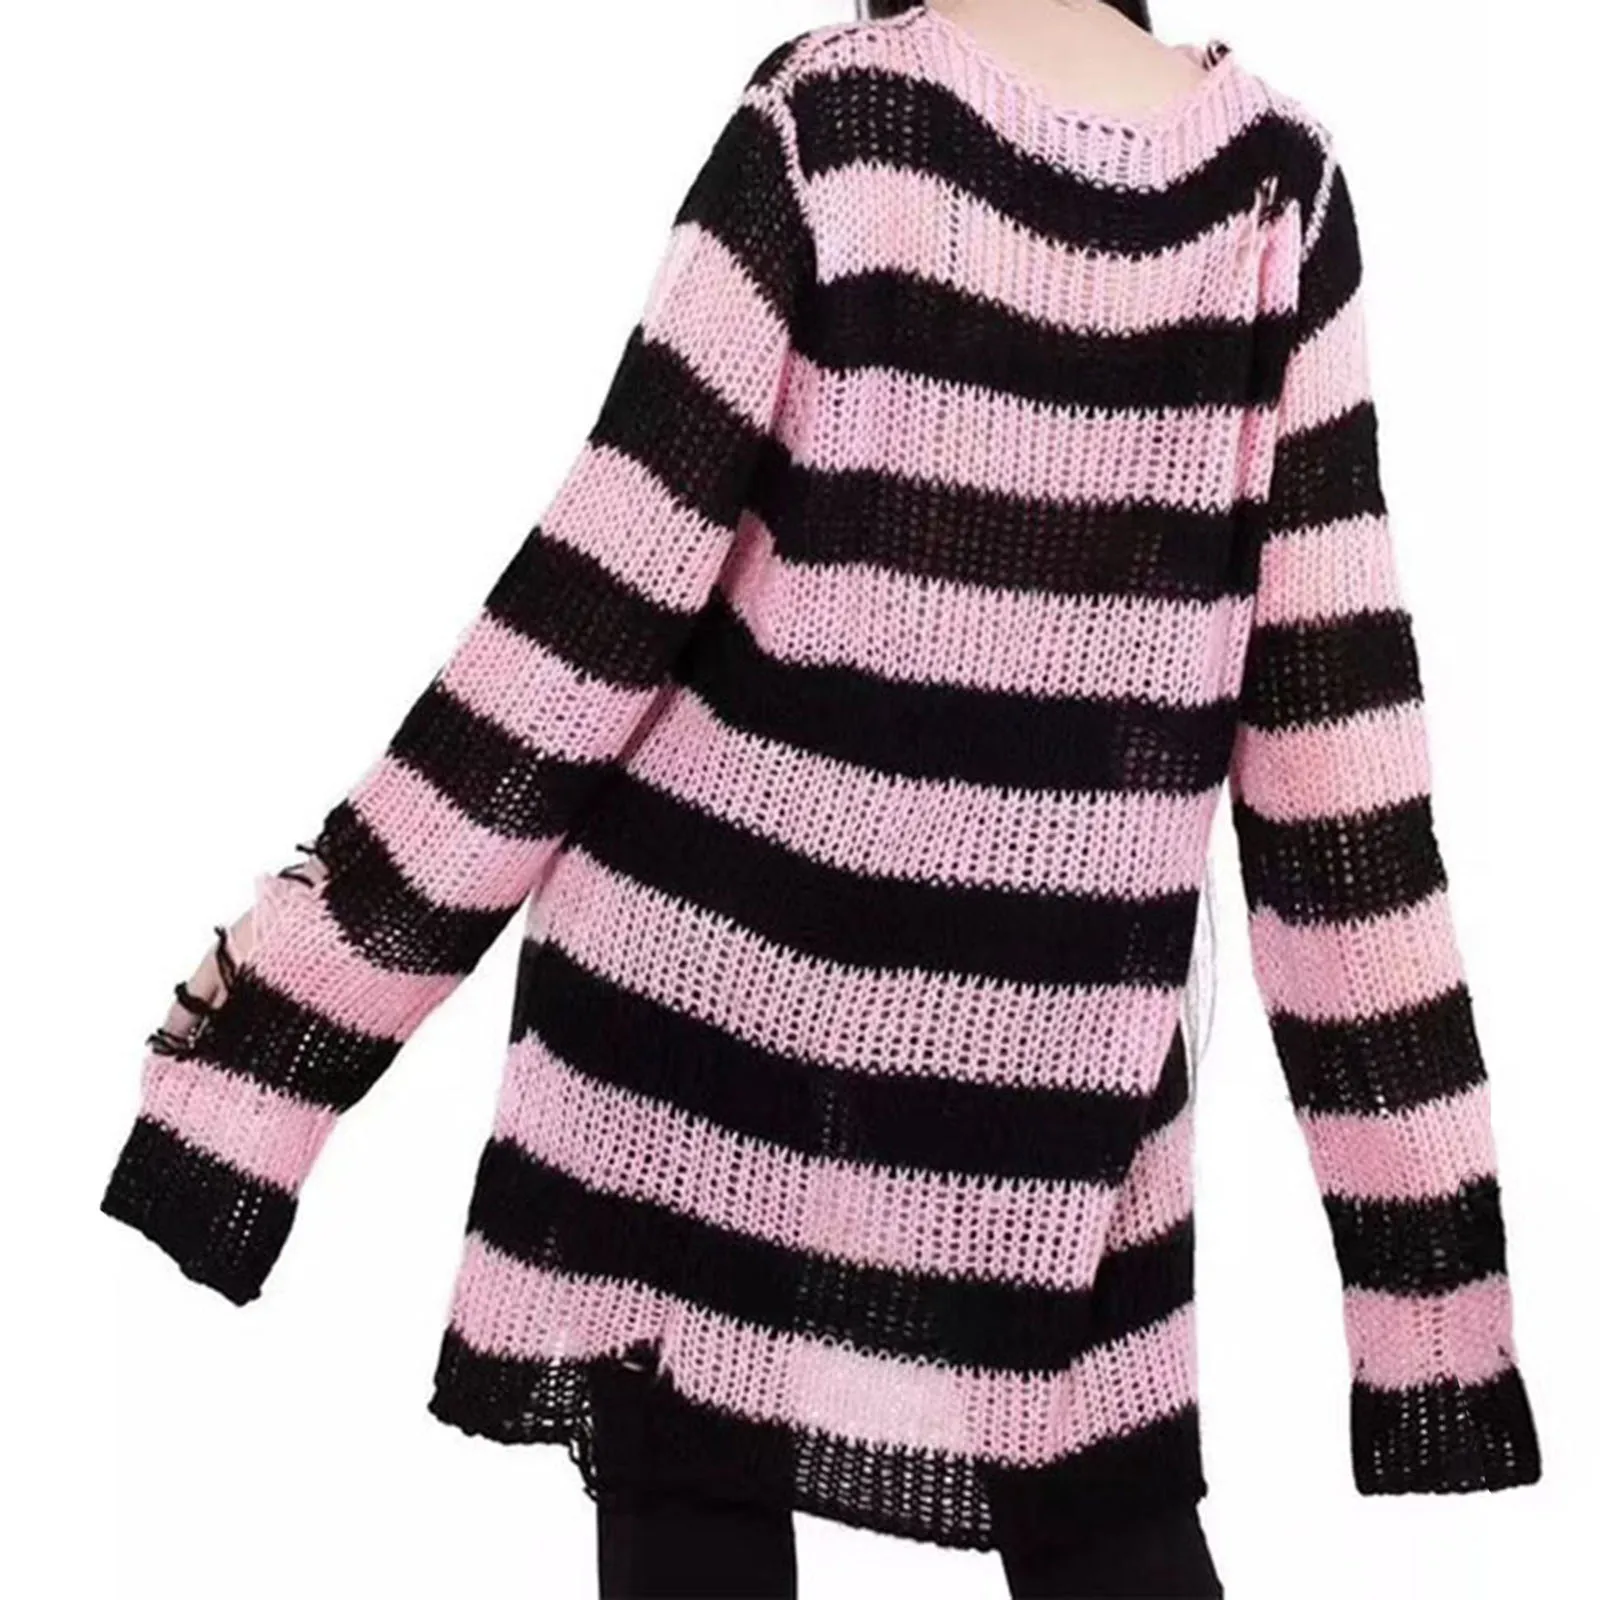 Women Punk Gothic Striped Hollow Out Sweater Color Block Long Sleeve Ripped Oversized Pullovers Retro Casual Knitted Jumpers red sweater